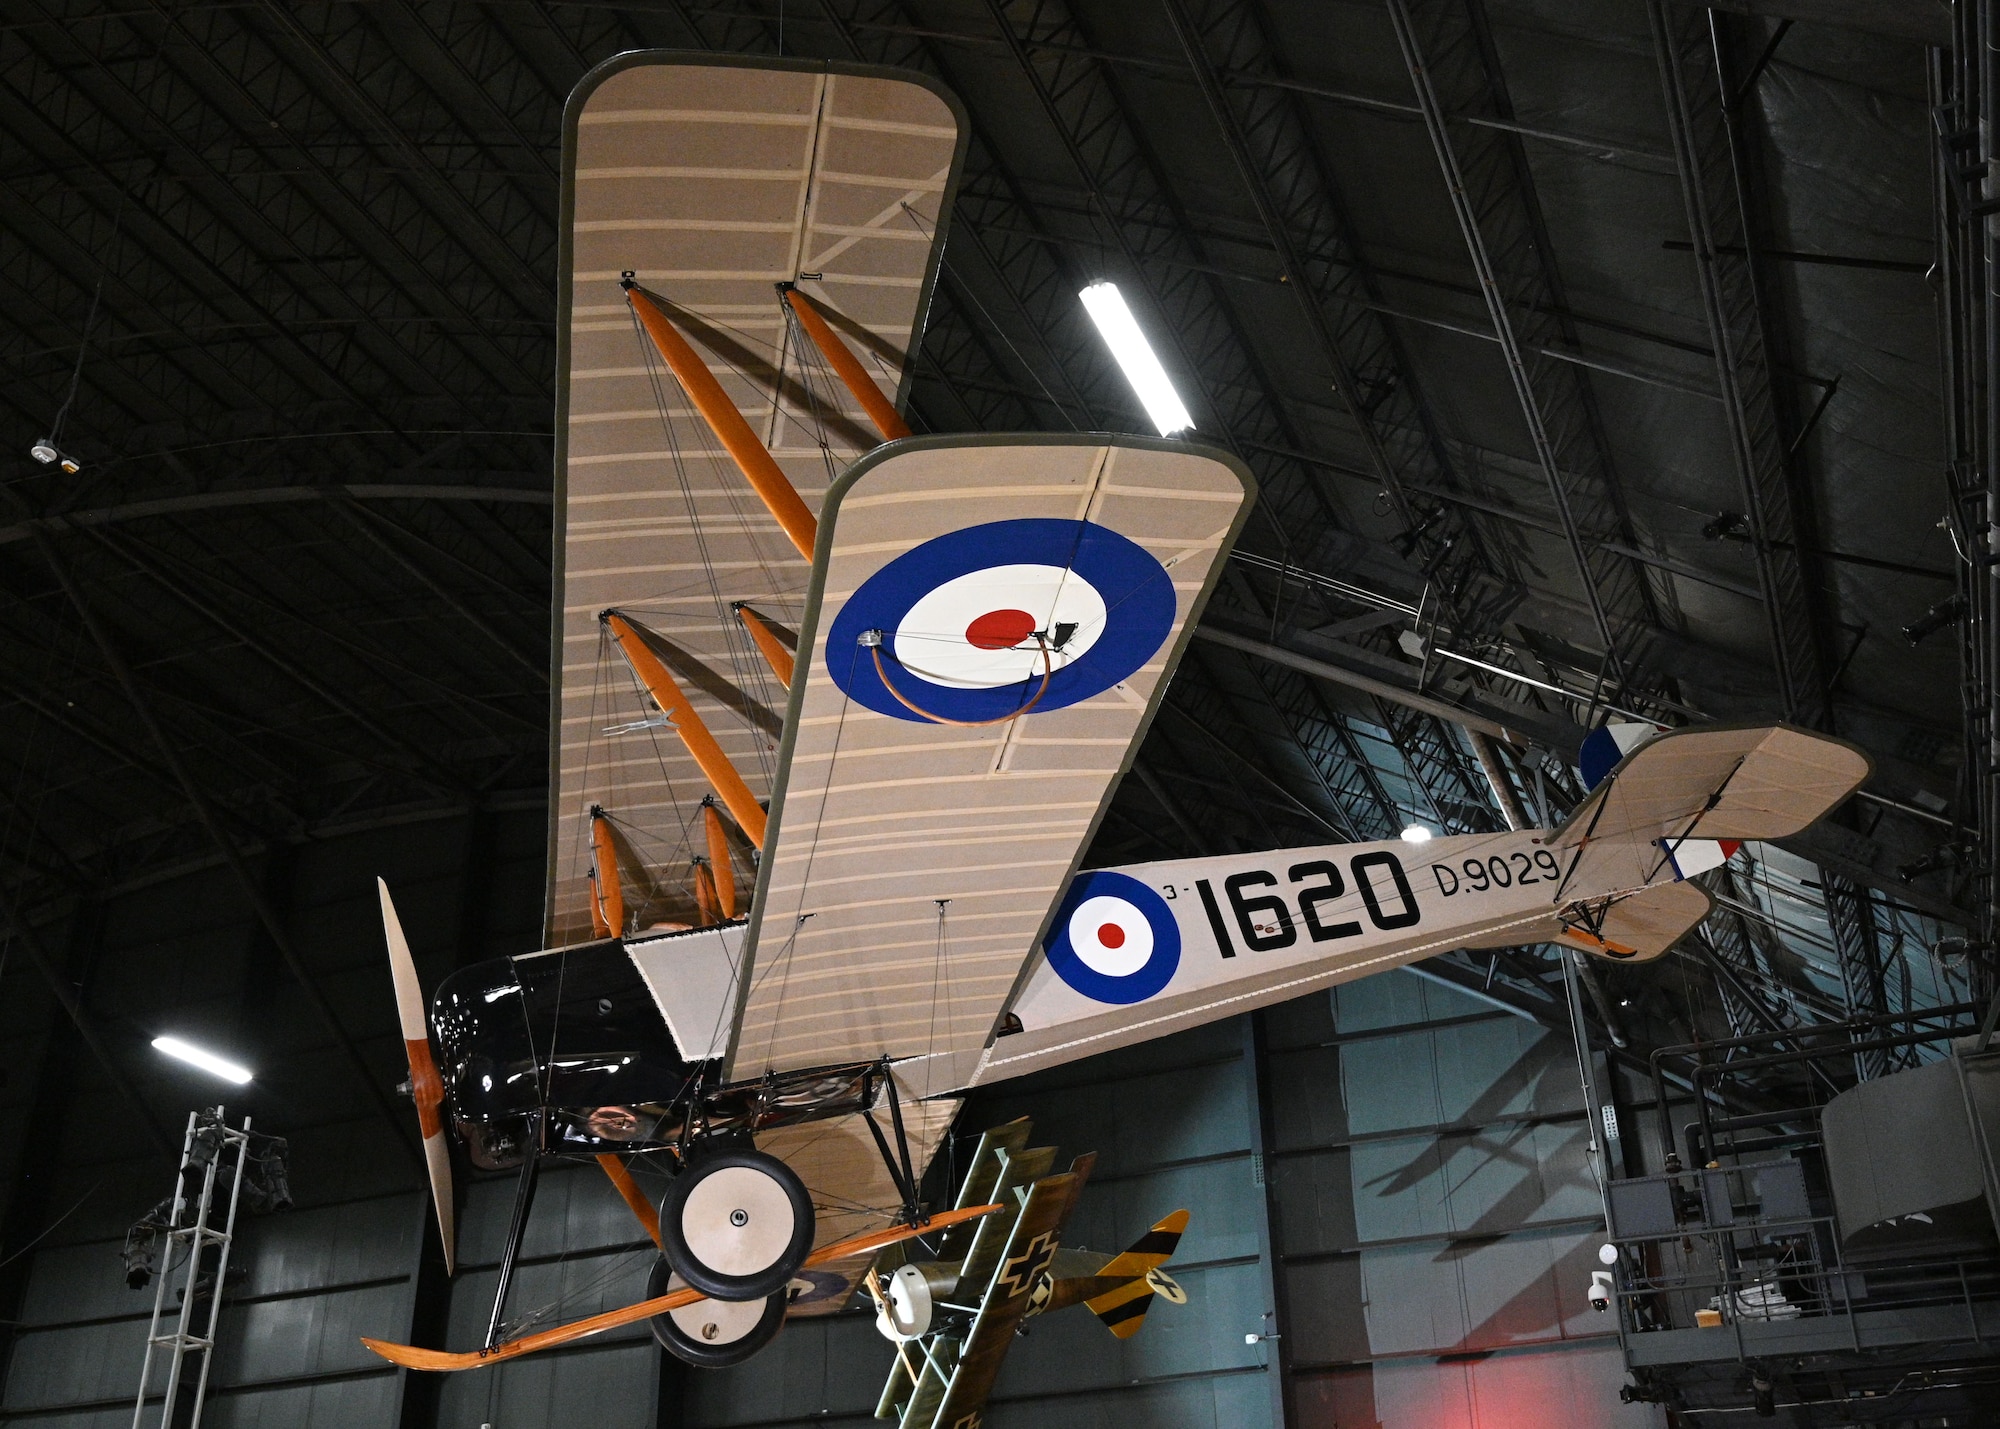 Avro 504K being lifted into position by a crane.